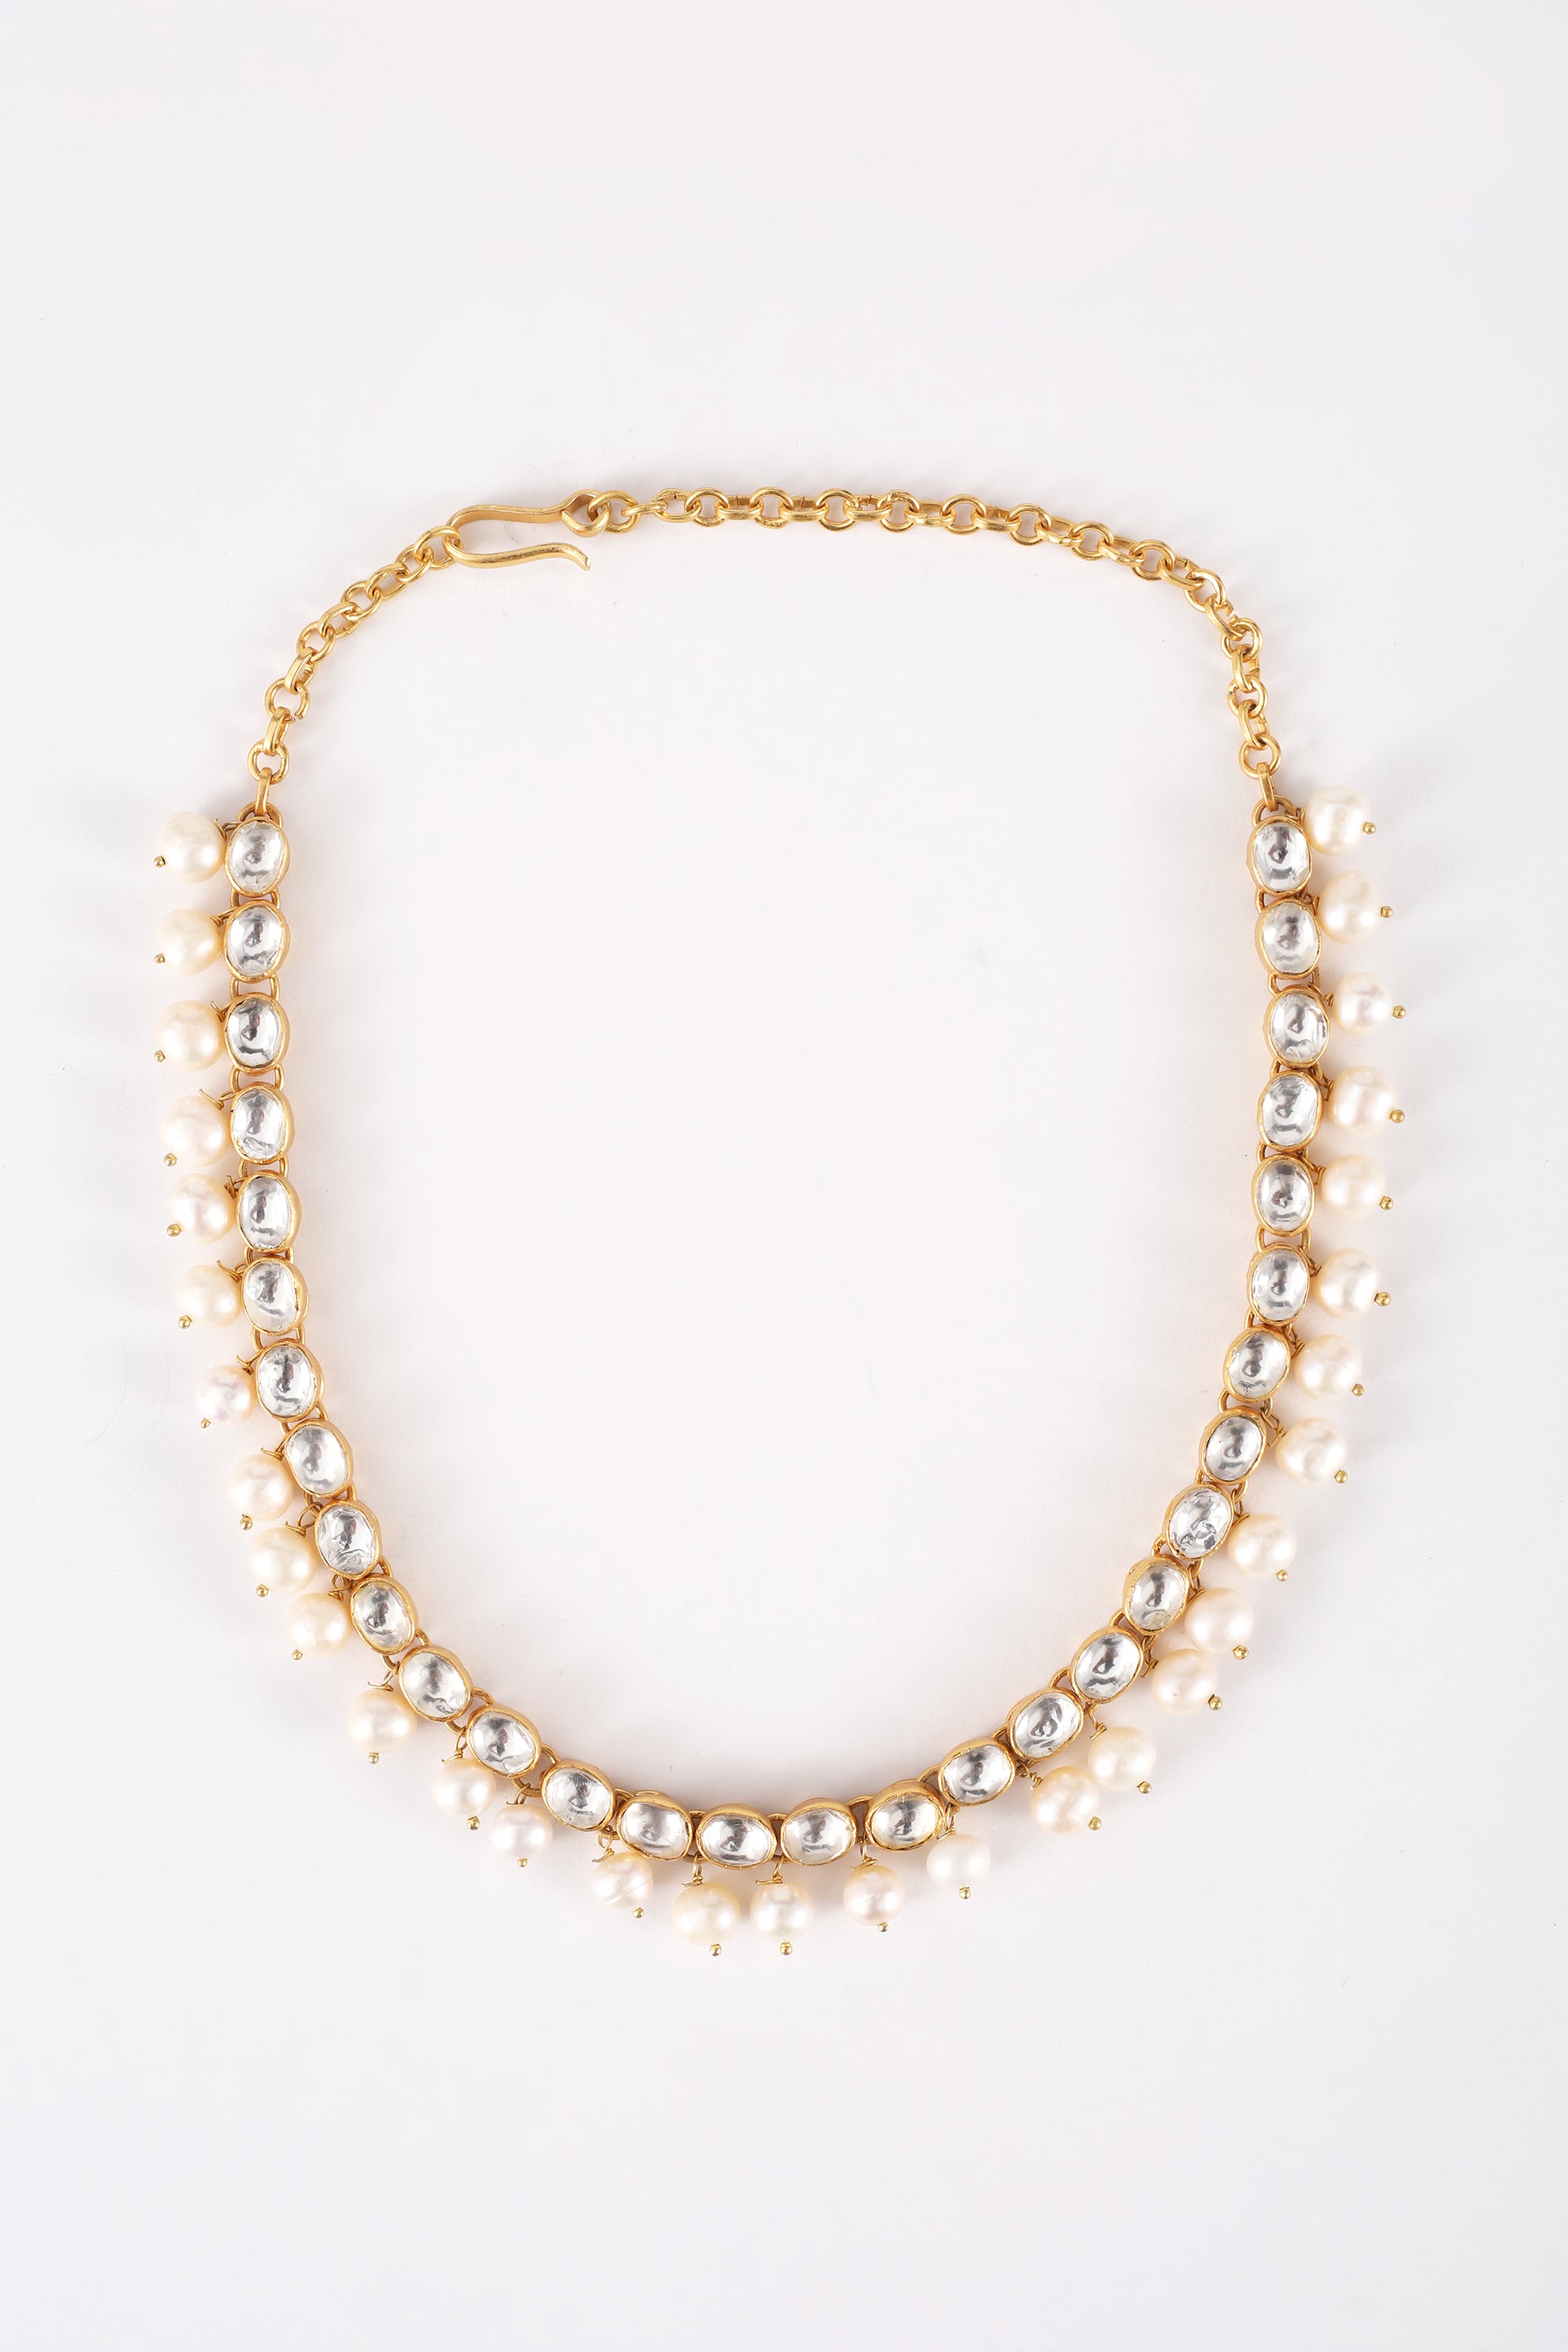 Reevati Gold Pearl necklace